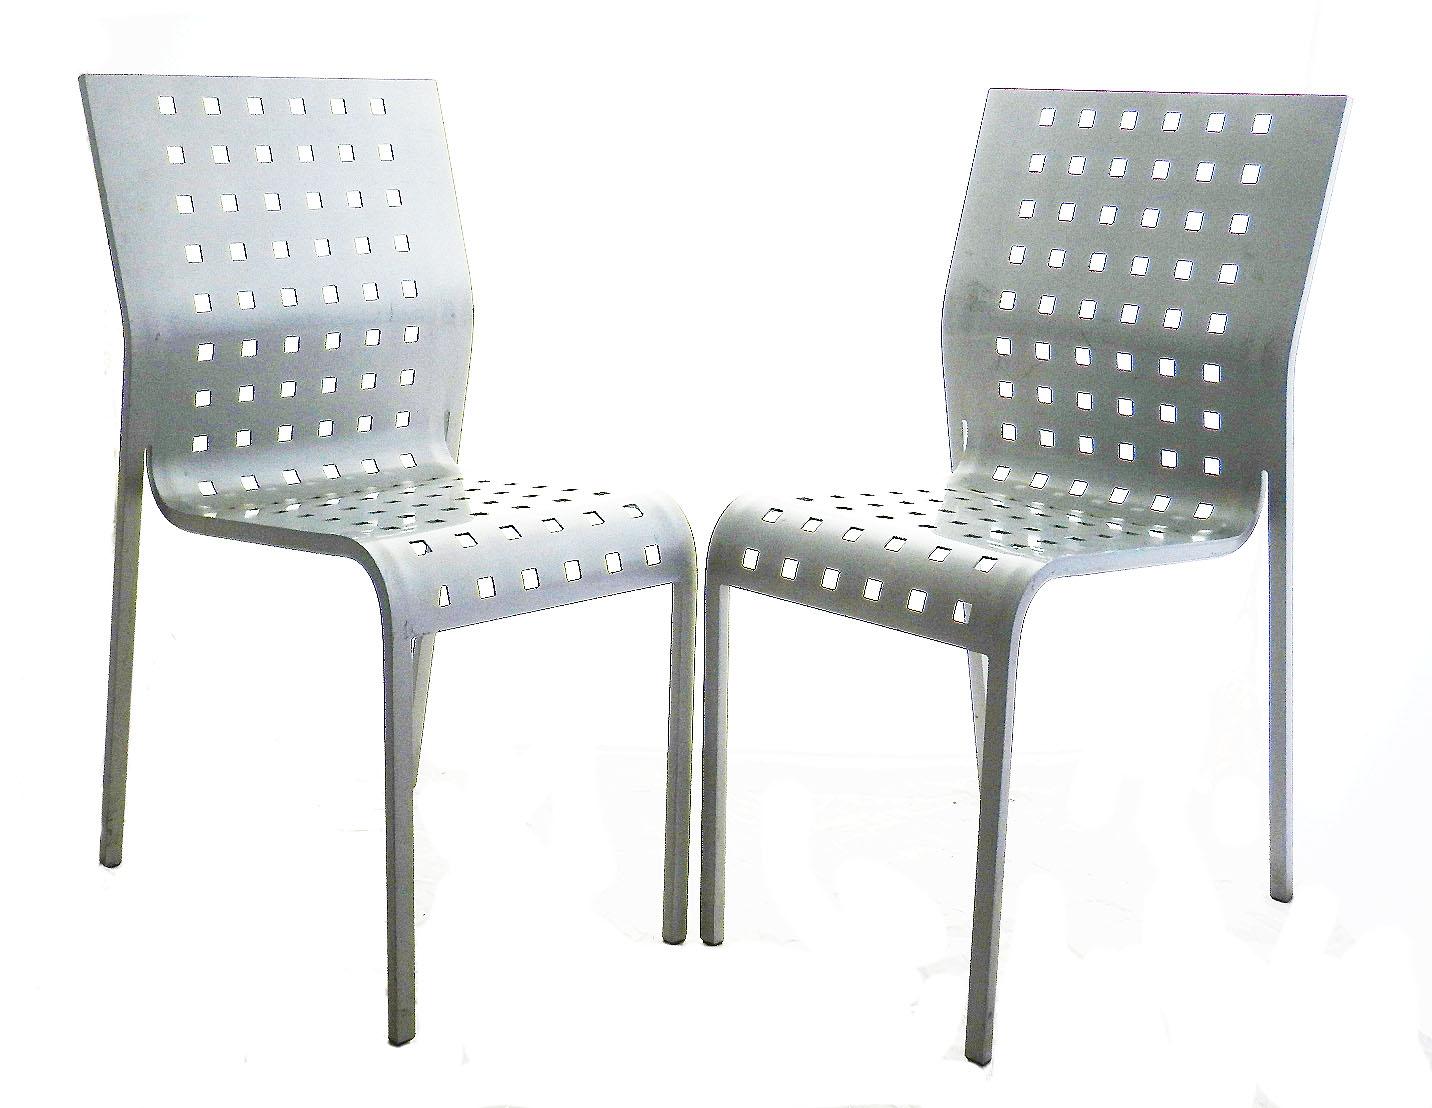 Pair of Mirandolina chairs No 2068 by Pietro Arosio, Italy, circa 1993
The seat is formed from one piece of curved aluminium
Very comfortable
Good vintage condition with only minor signs of use.
Provenance from the estate of Italian Designer and